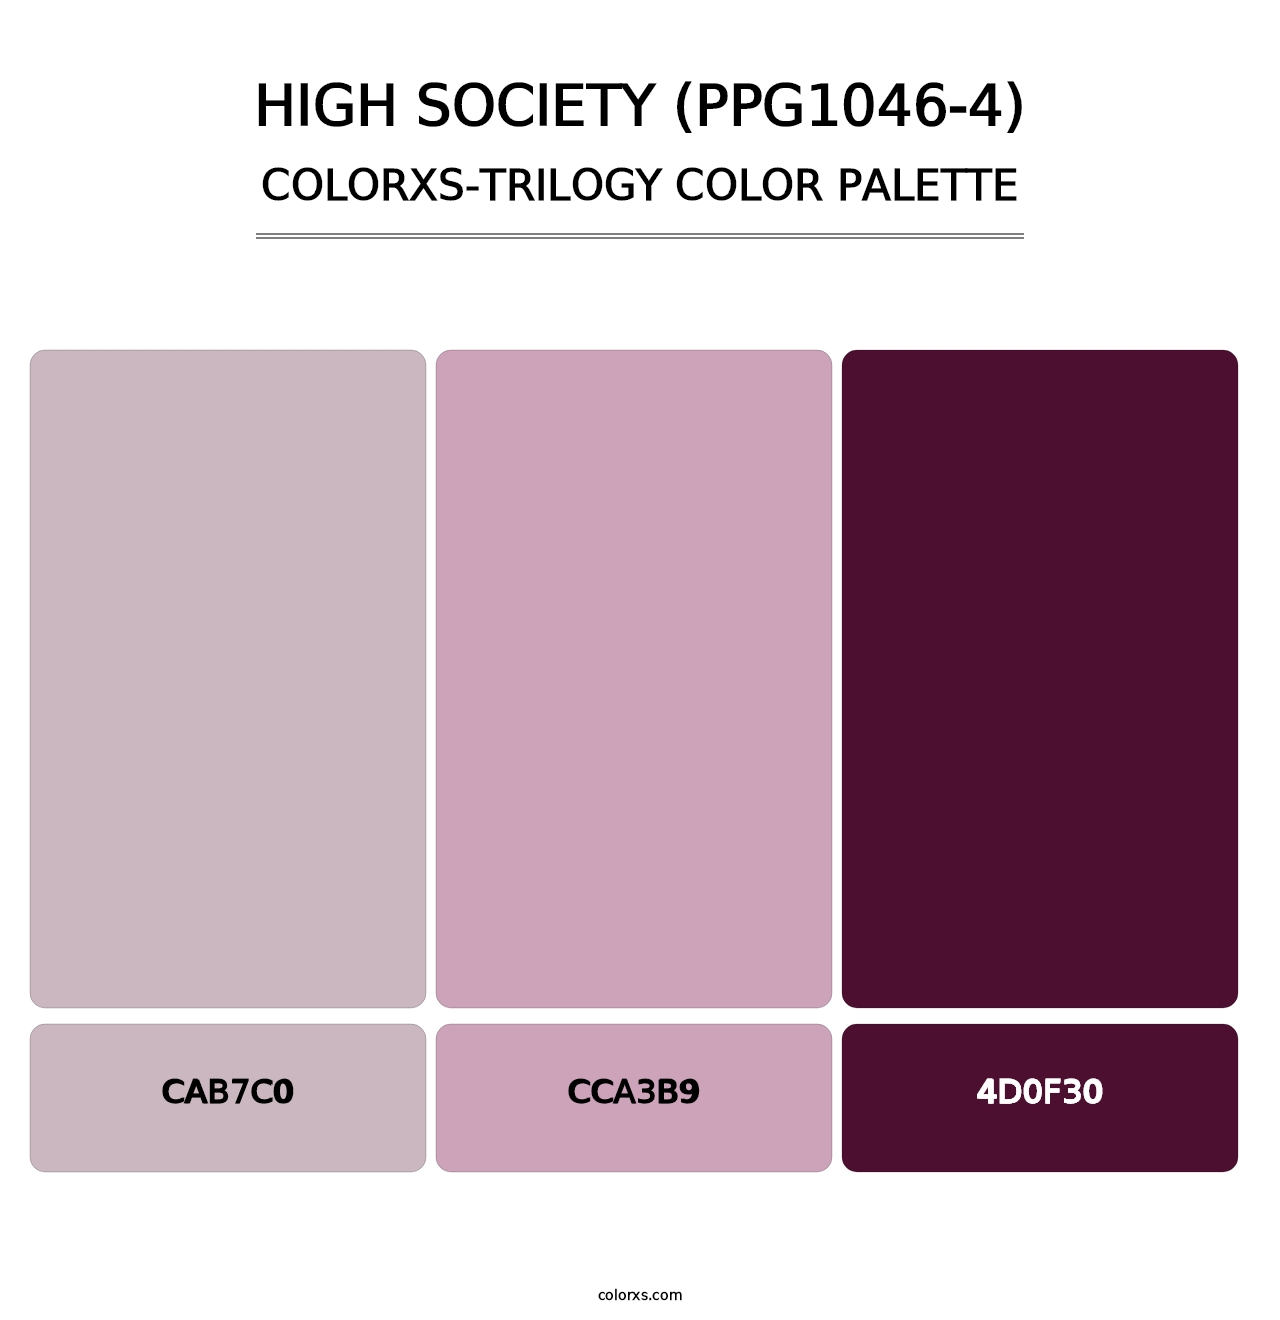 High Society (PPG1046-4) - Colorxs Trilogy Palette